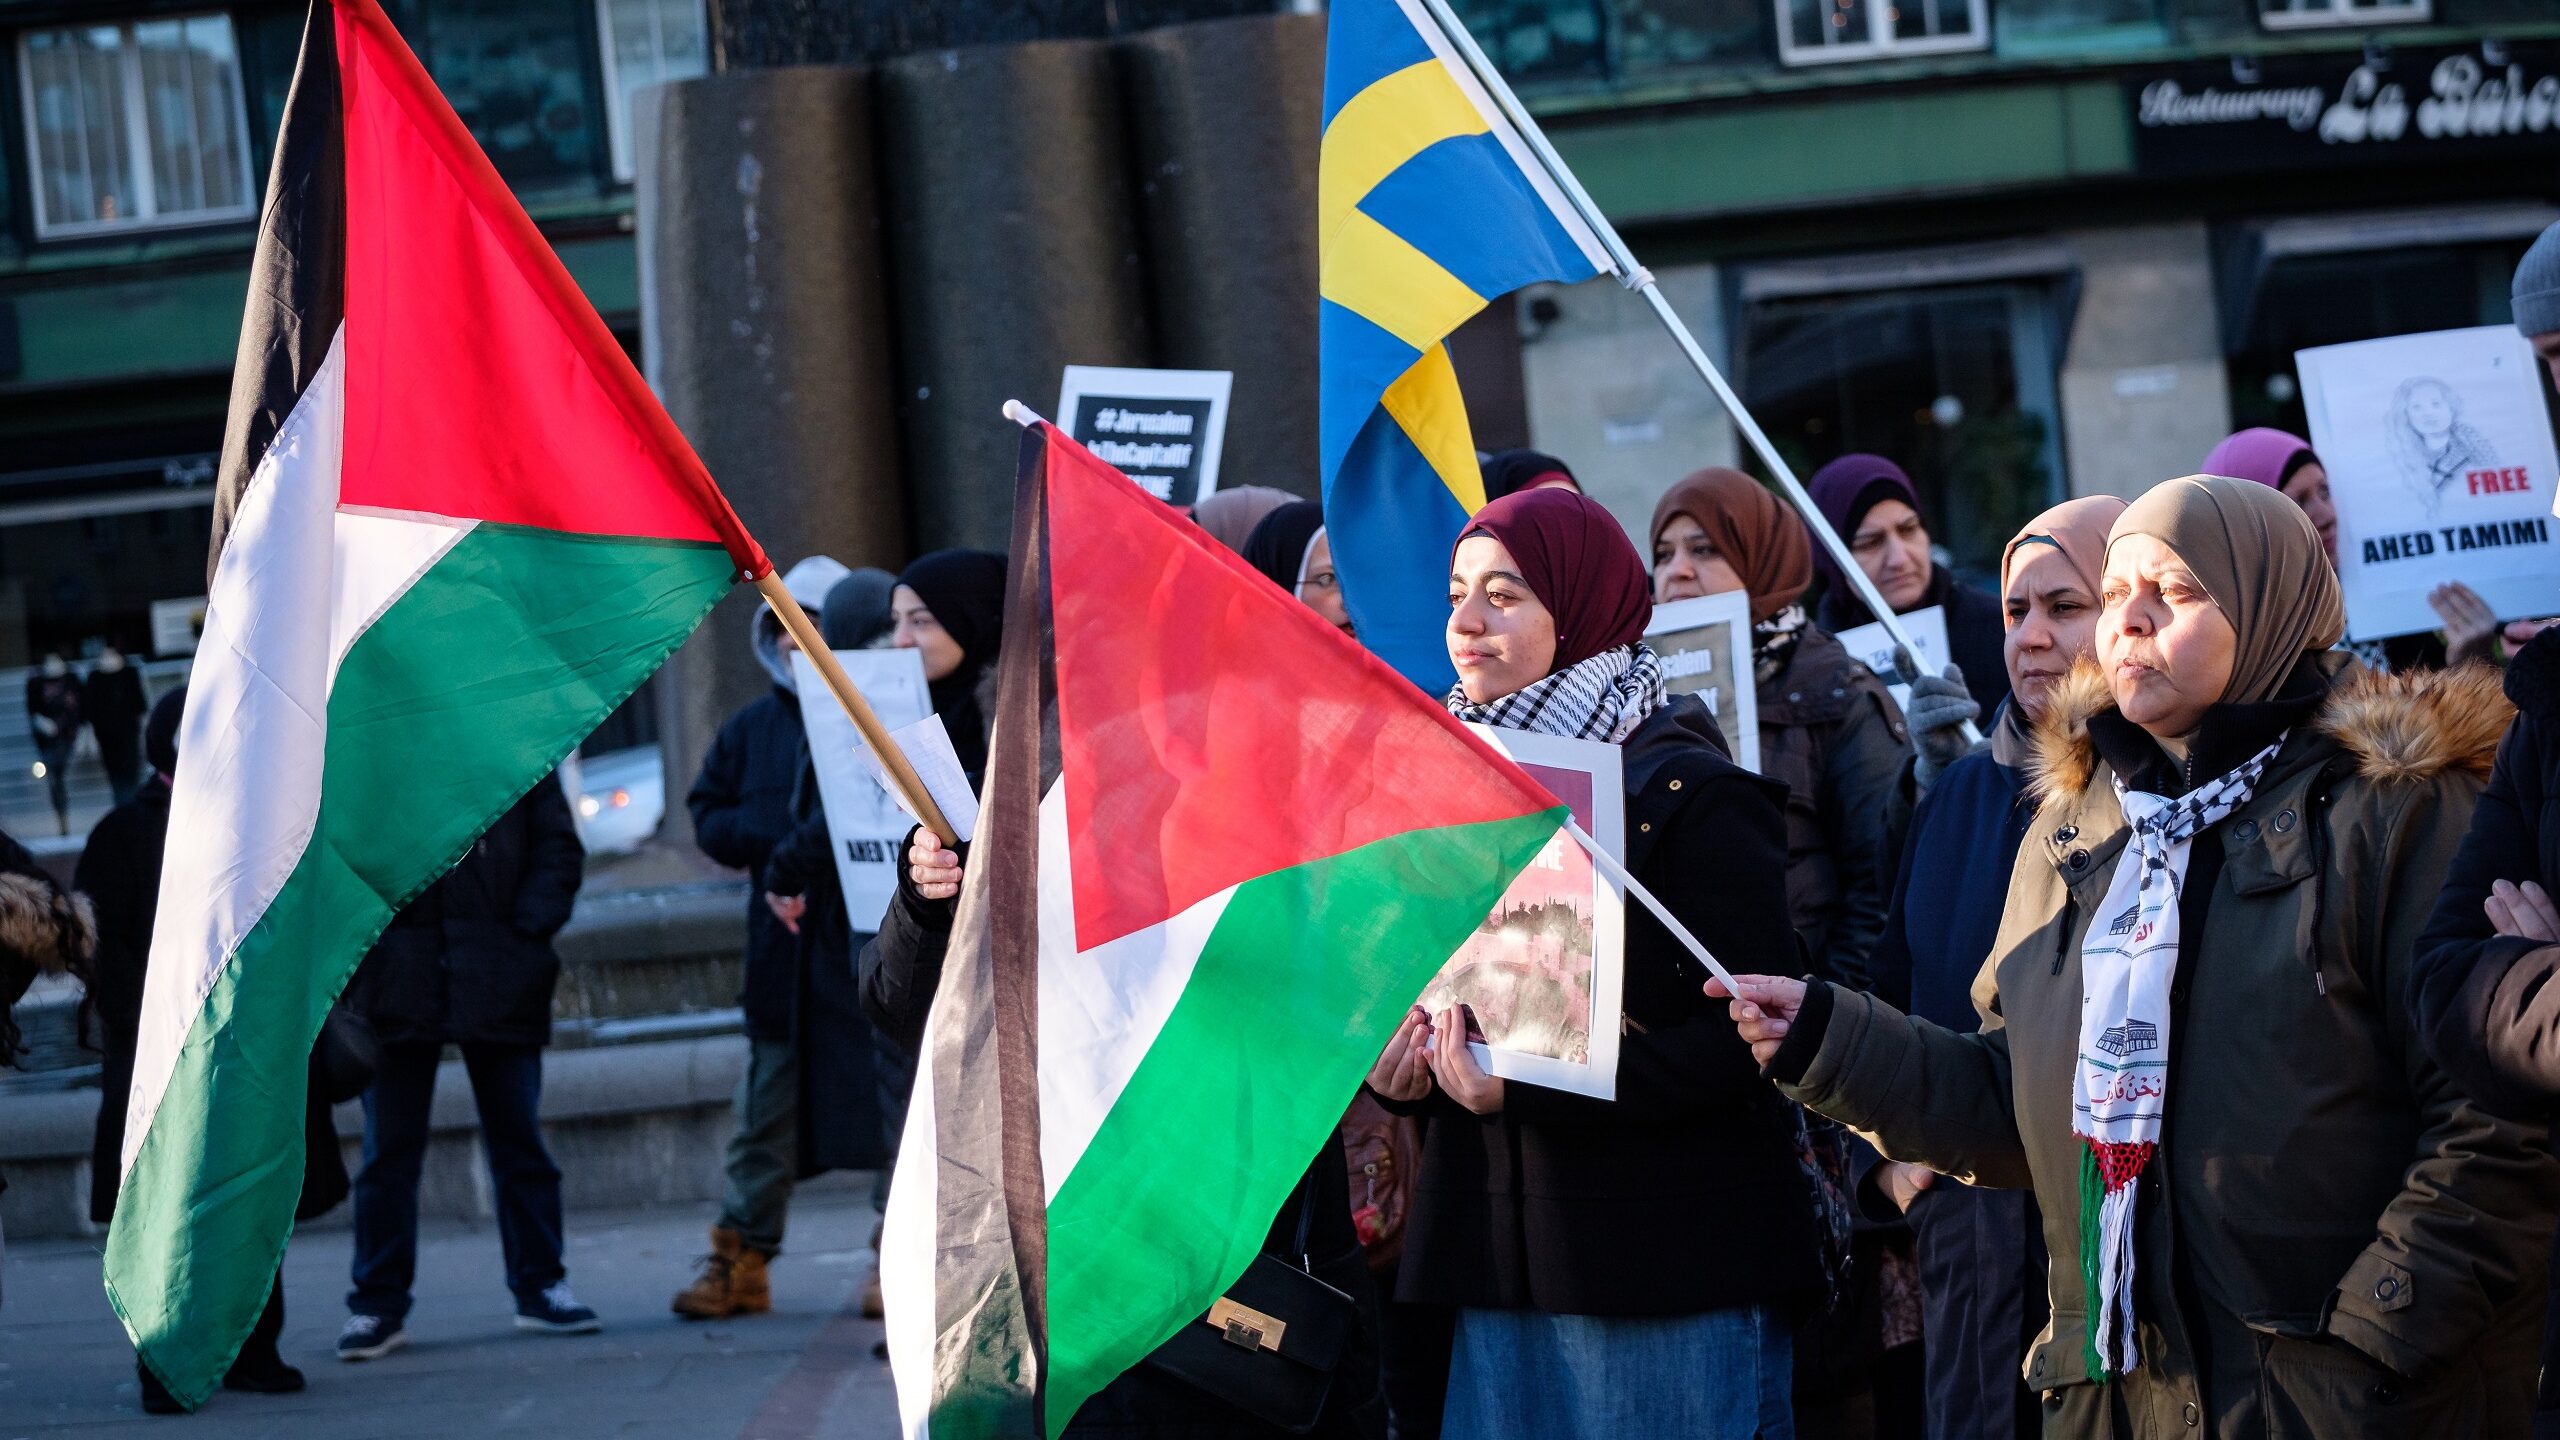 Palestinian Officials Criticize European Palestinians Conference in Malmö